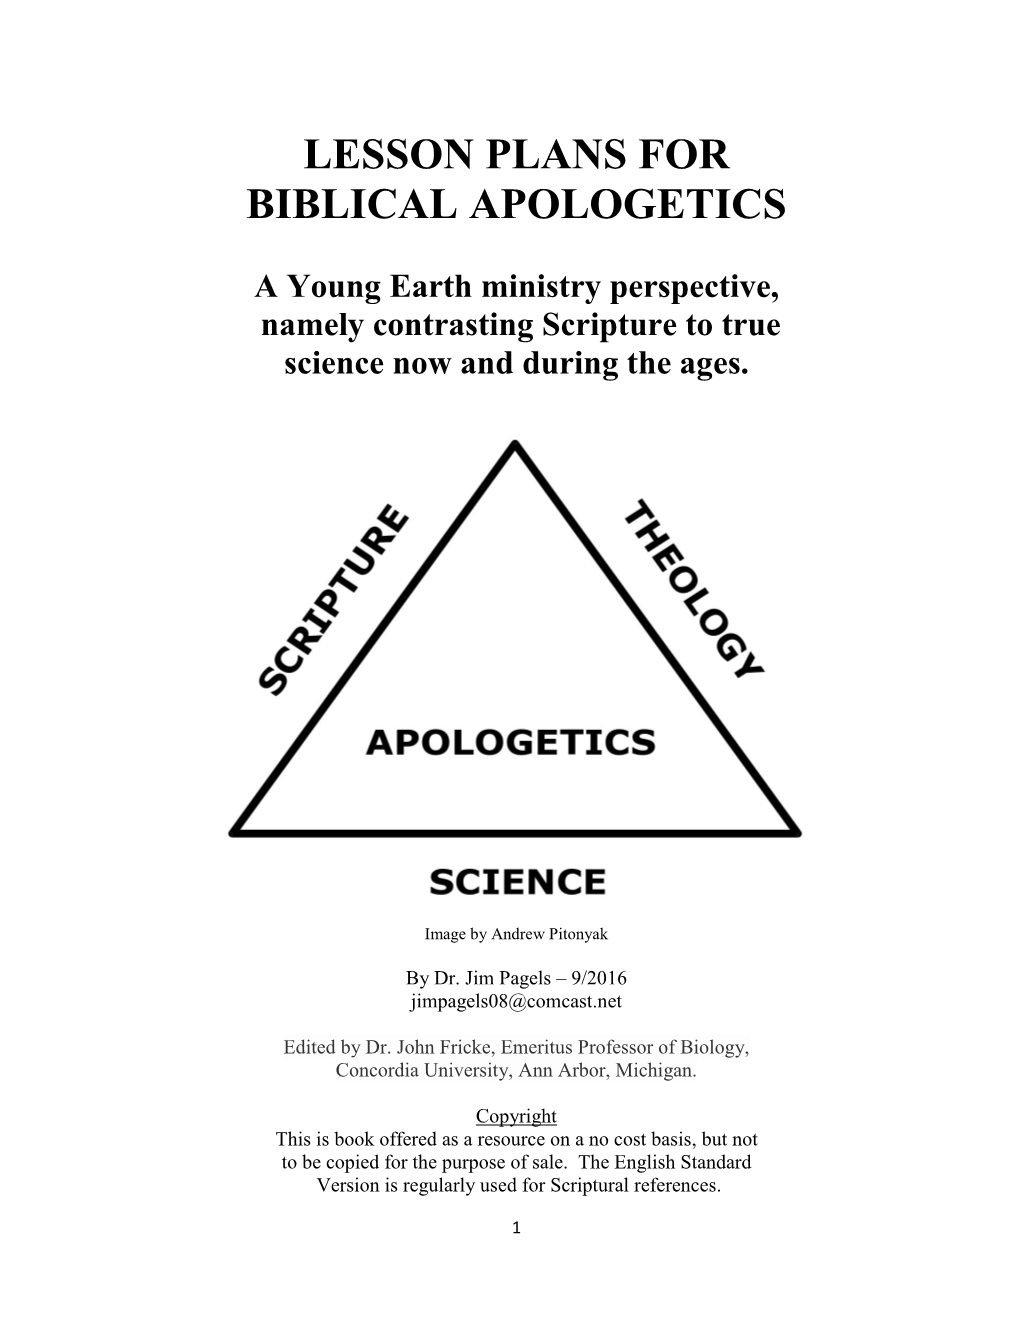 Lesson Plans for Biblical Apologetics